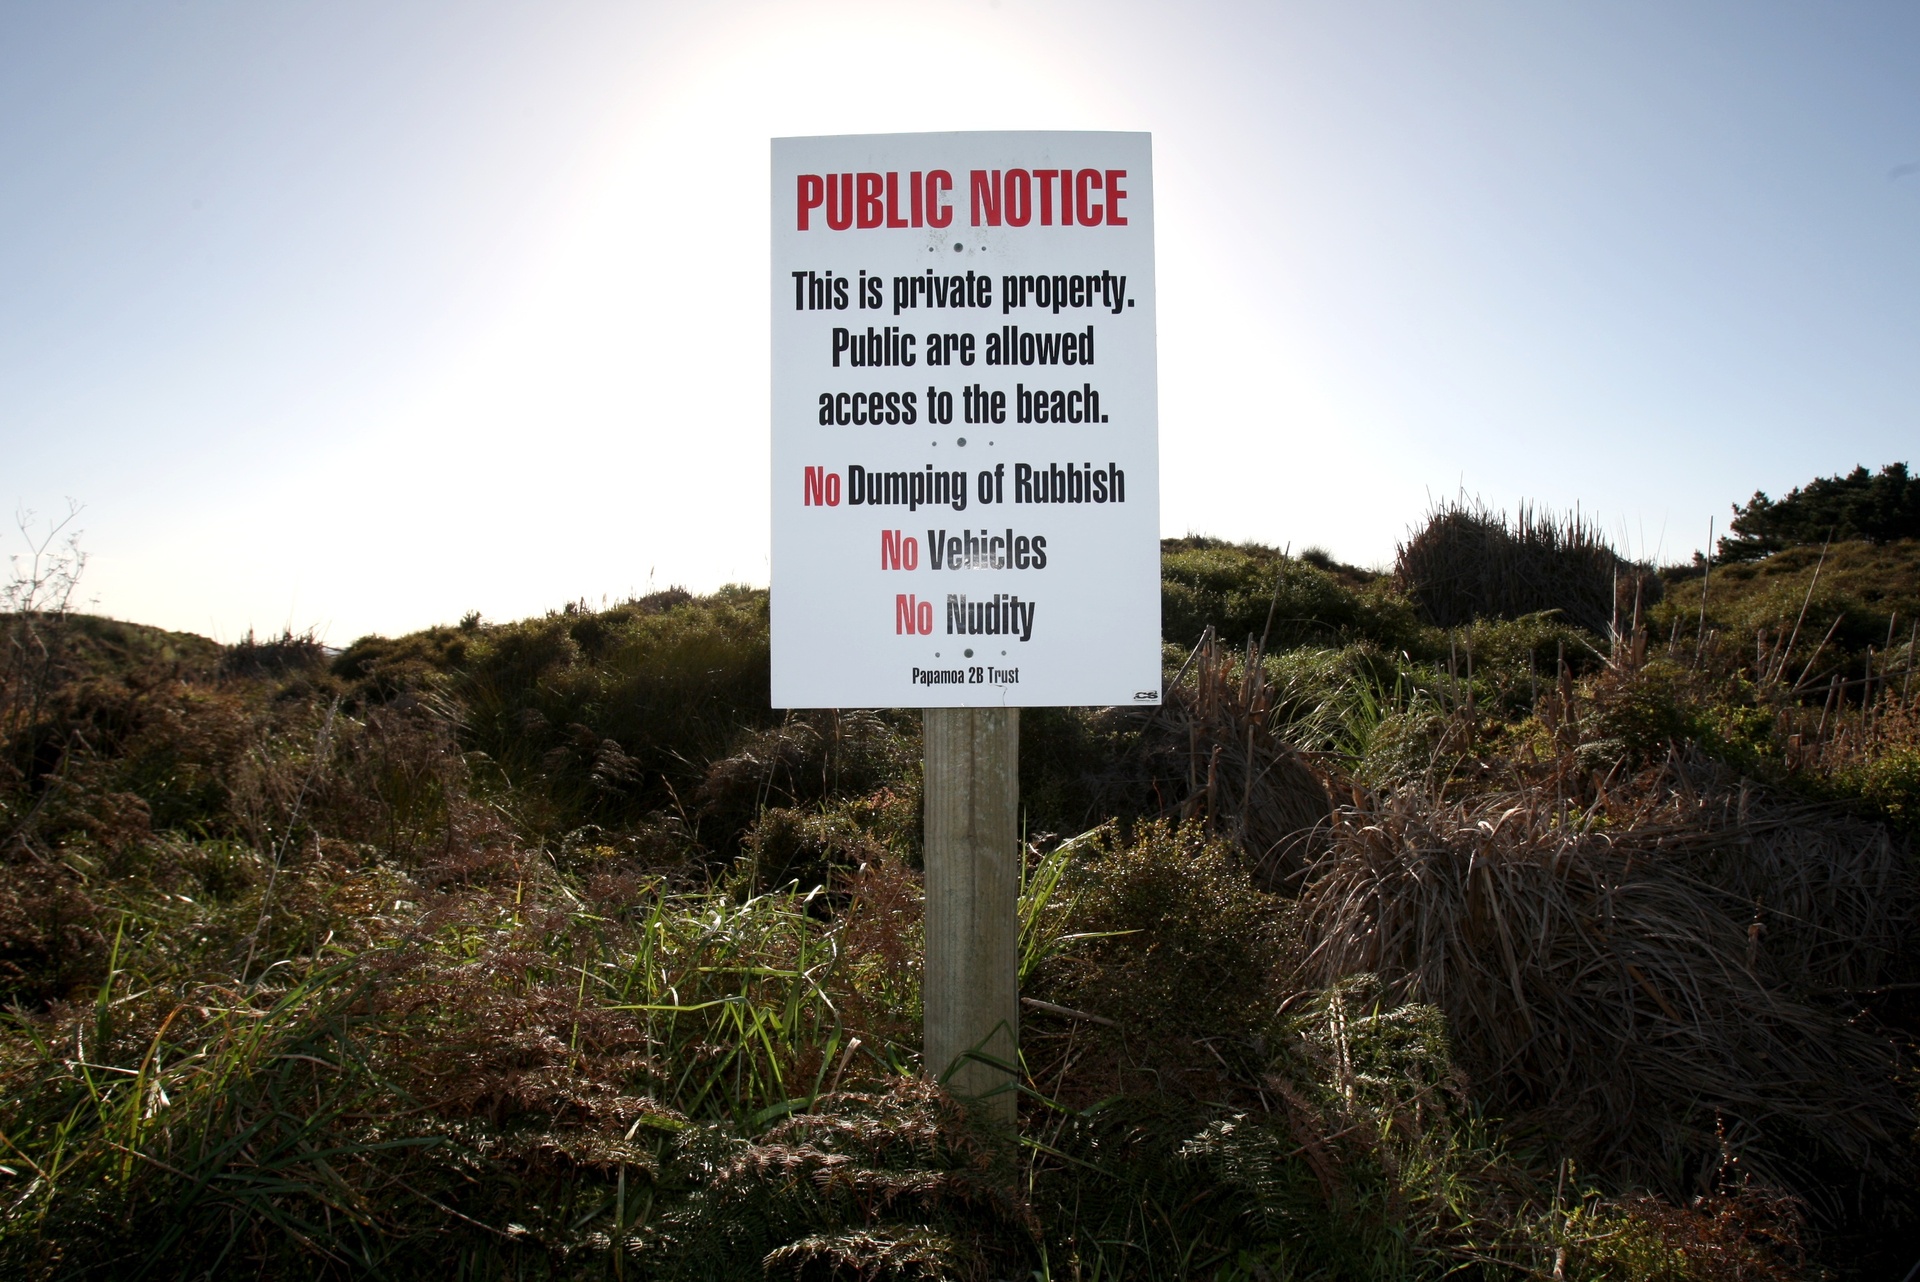 Nature Nudist - Dawn Picken: Bodies are beautiful - why do some of us have trouble with  public nudity? - NZ Herald